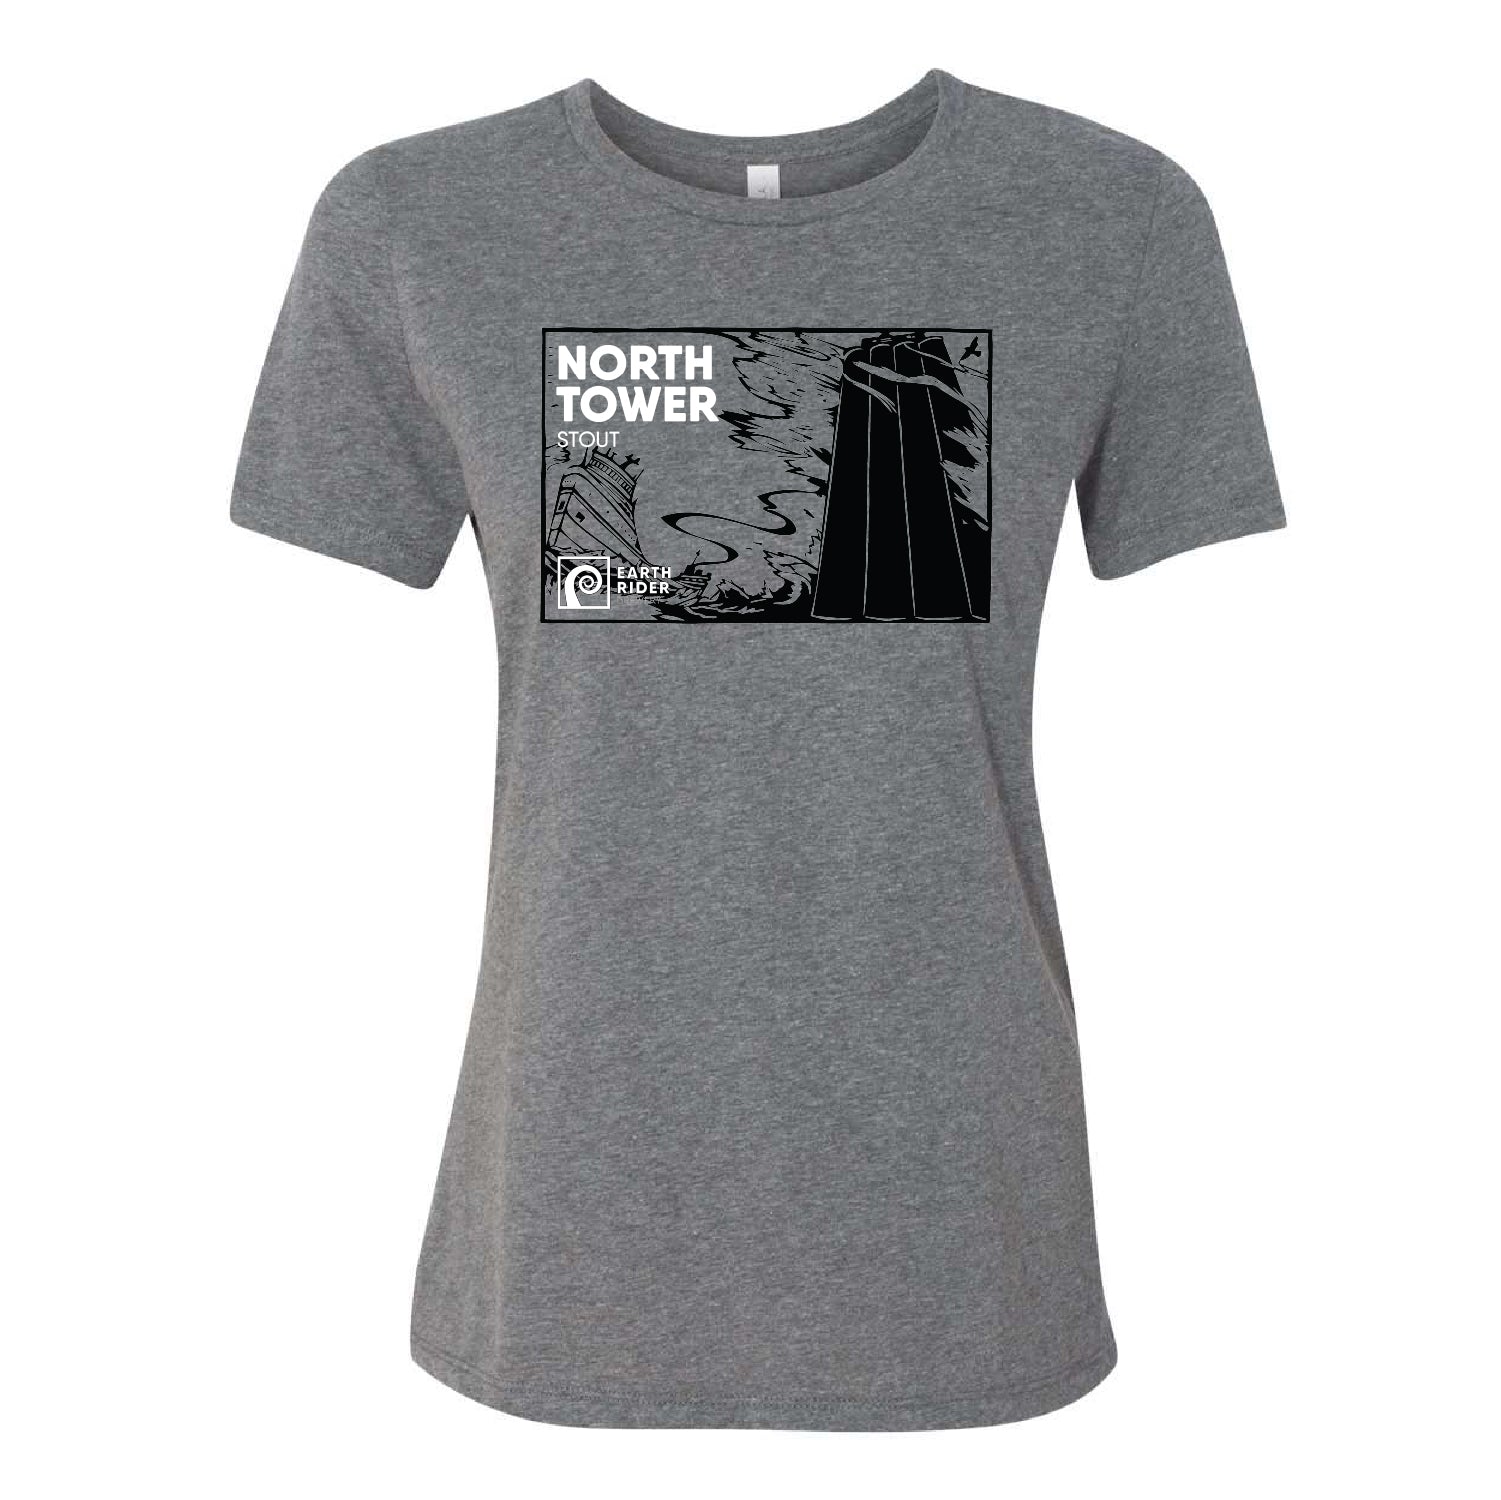 Earth Rider North Tower Stout Women's Tee